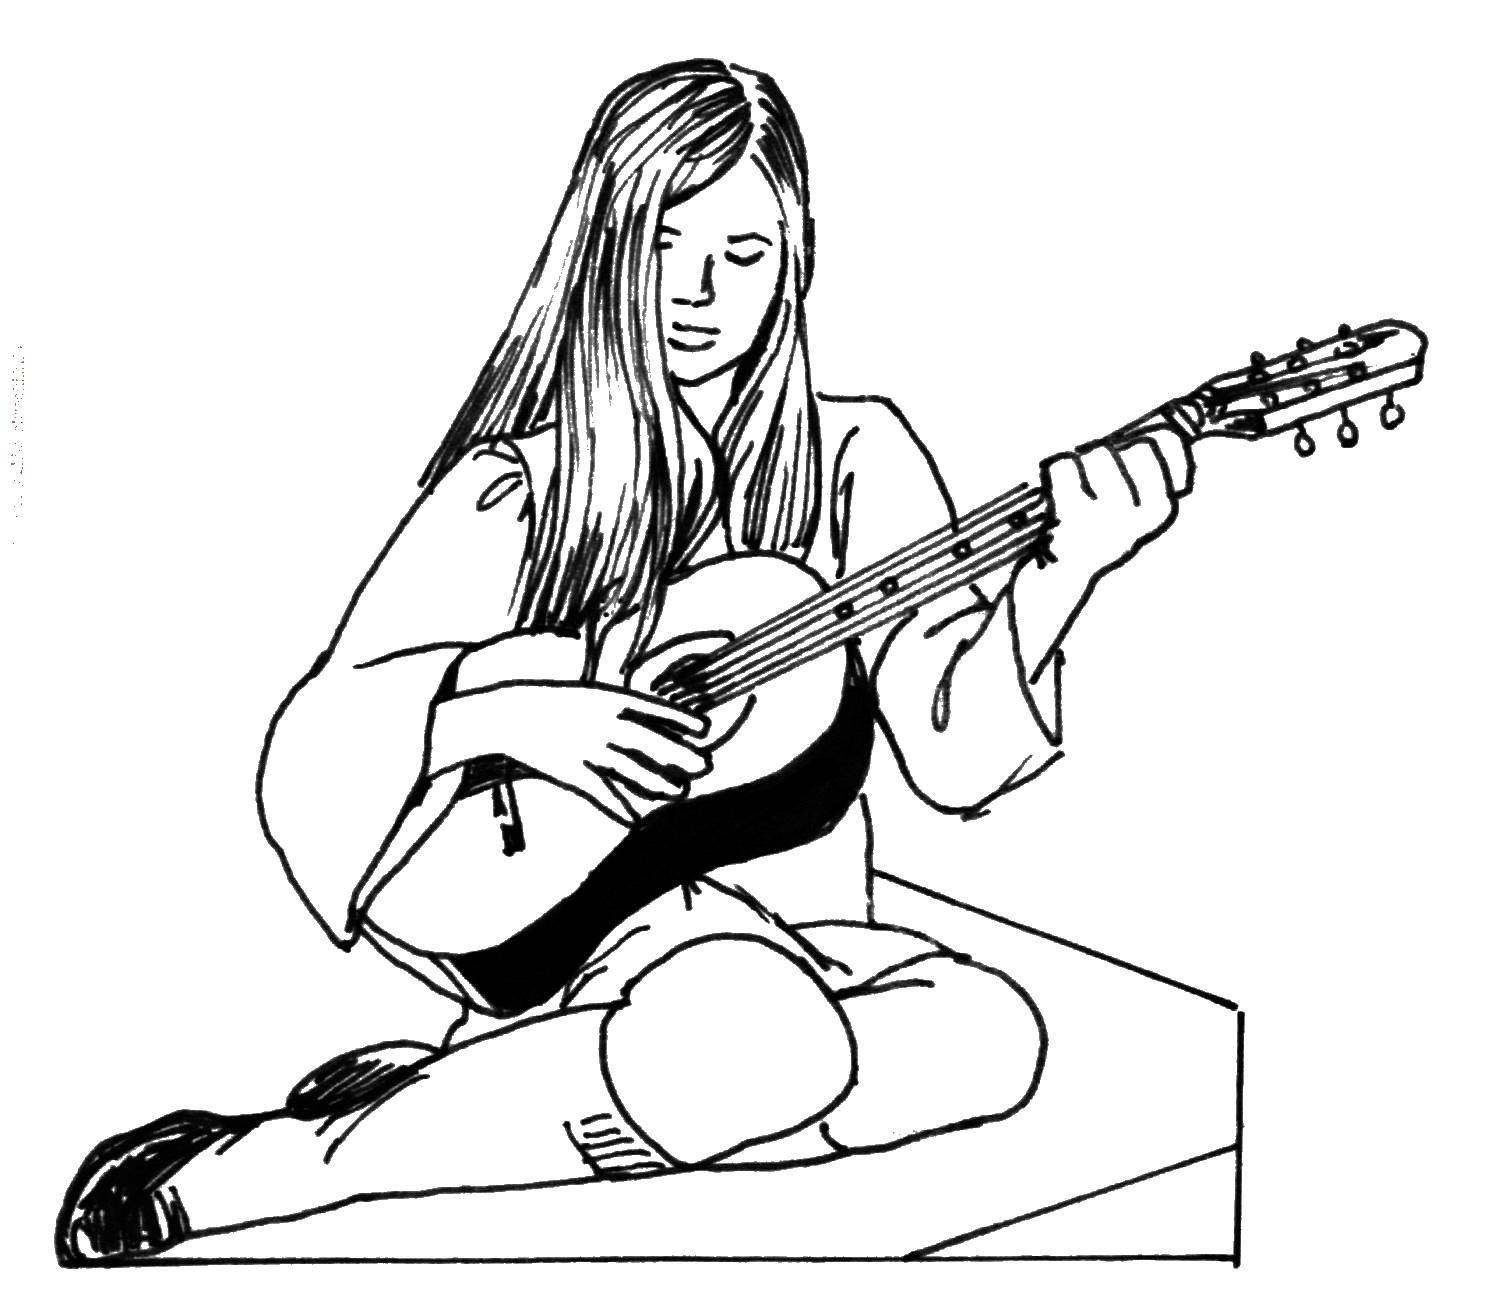 Coloring Girl playing the guitar. Category music. Tags:  girl, guitar.